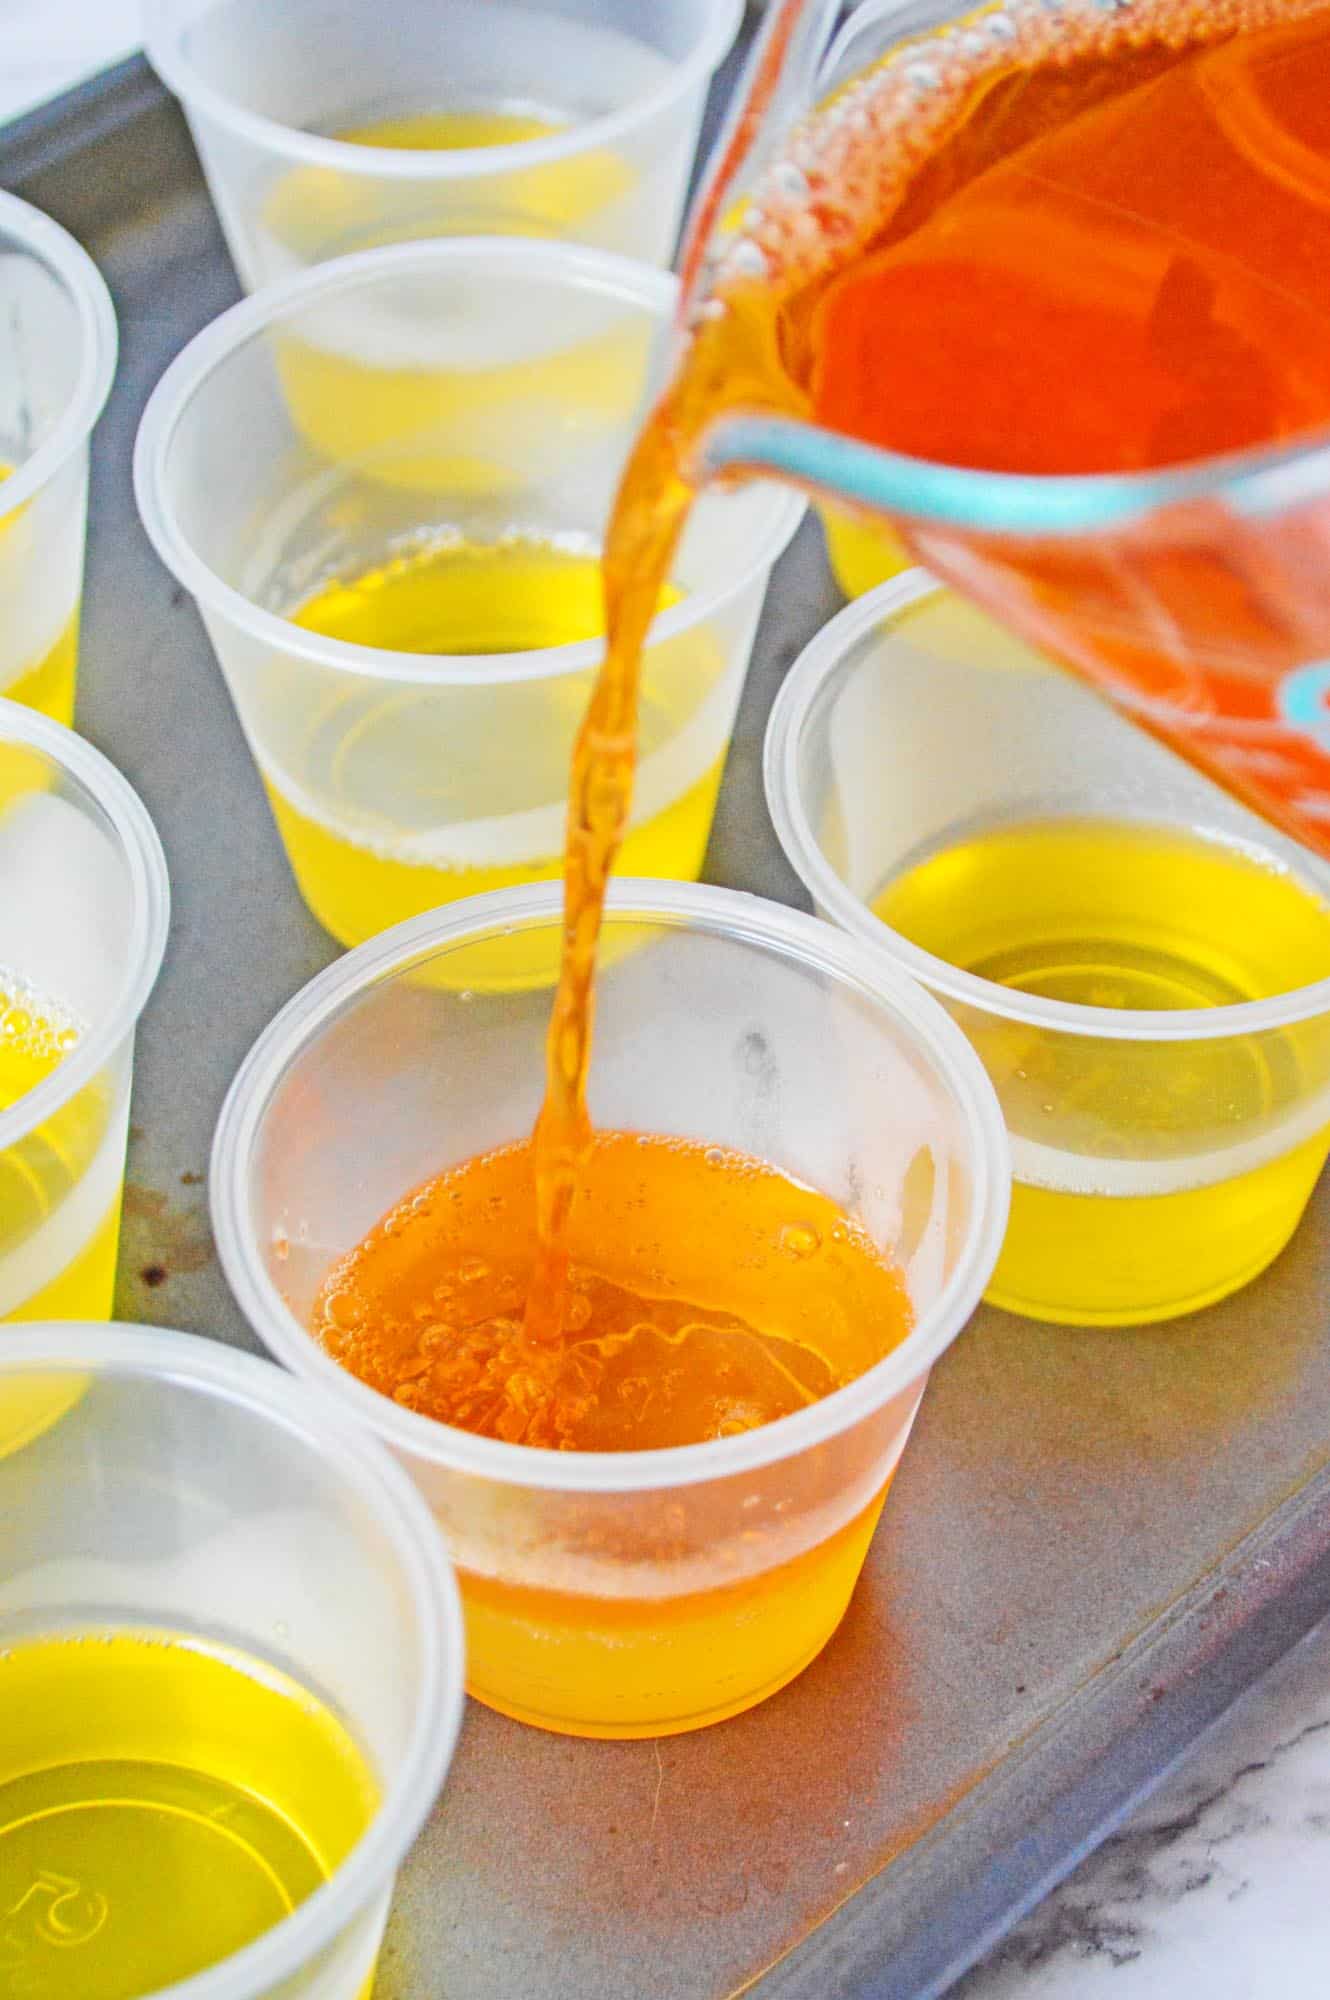 cups half filled with yellow jello. Orange jello is being poured into the cups